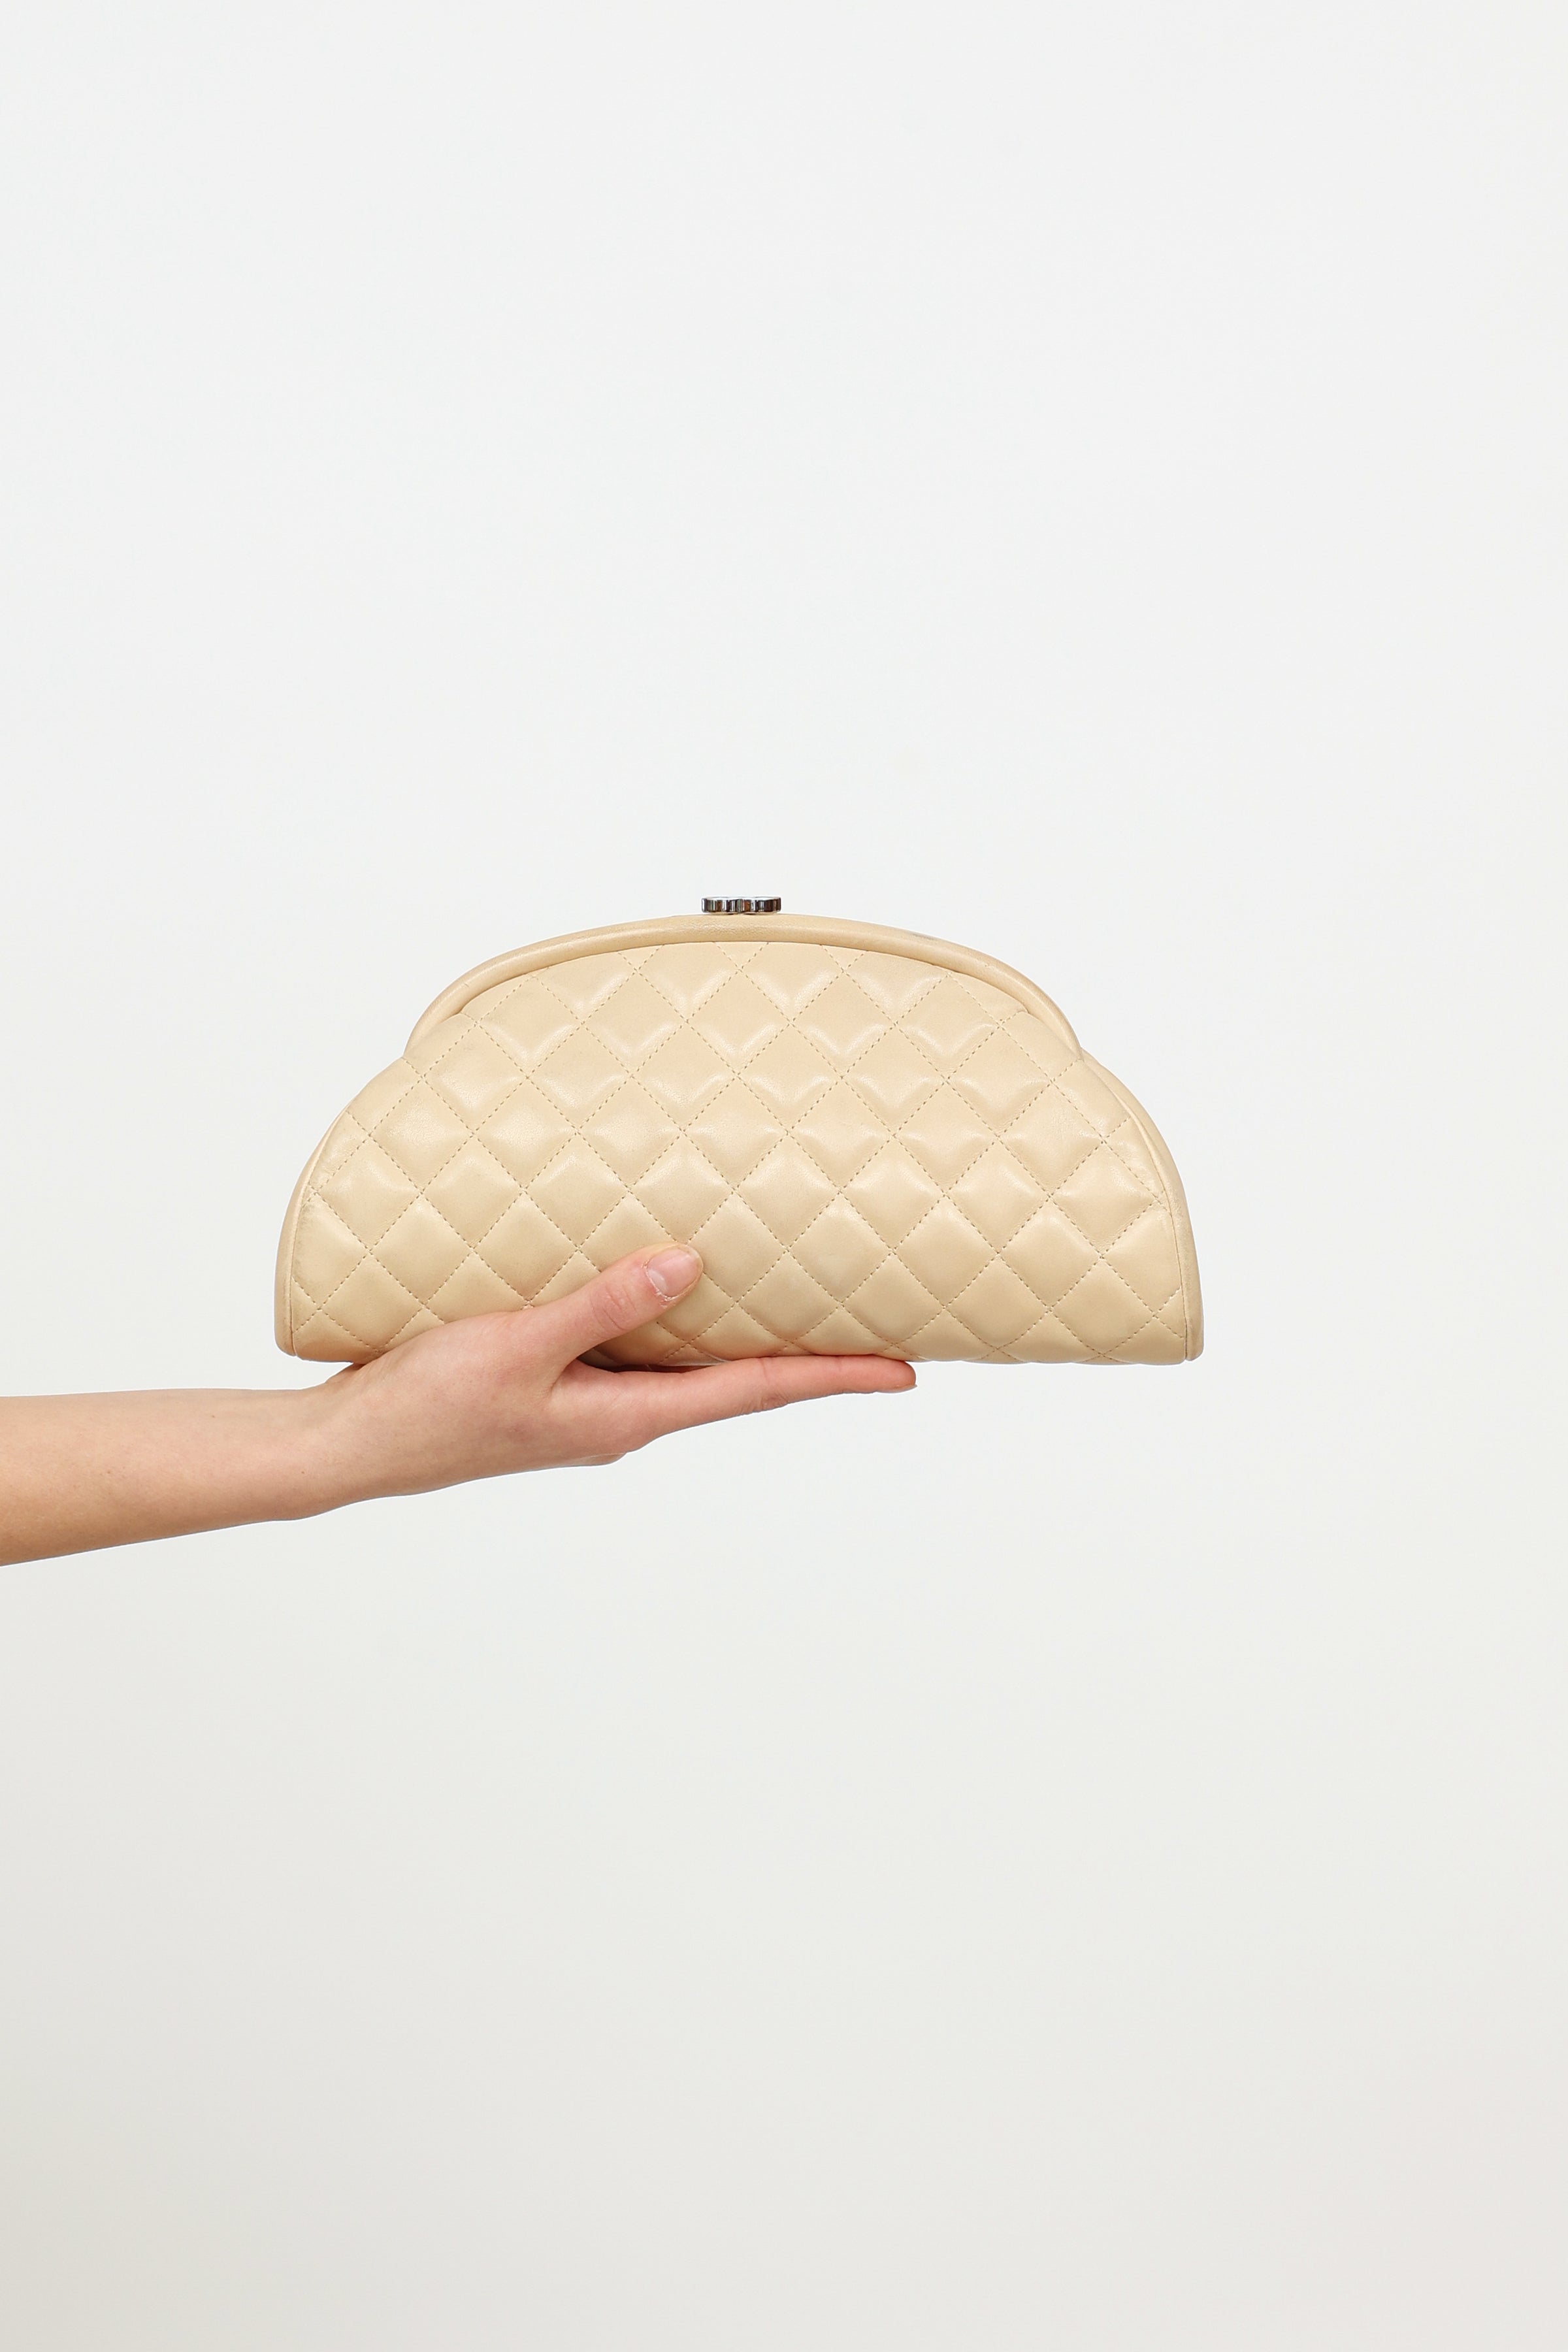 Chanel // Beige Quilted Leather Clutch – VSP Consignment